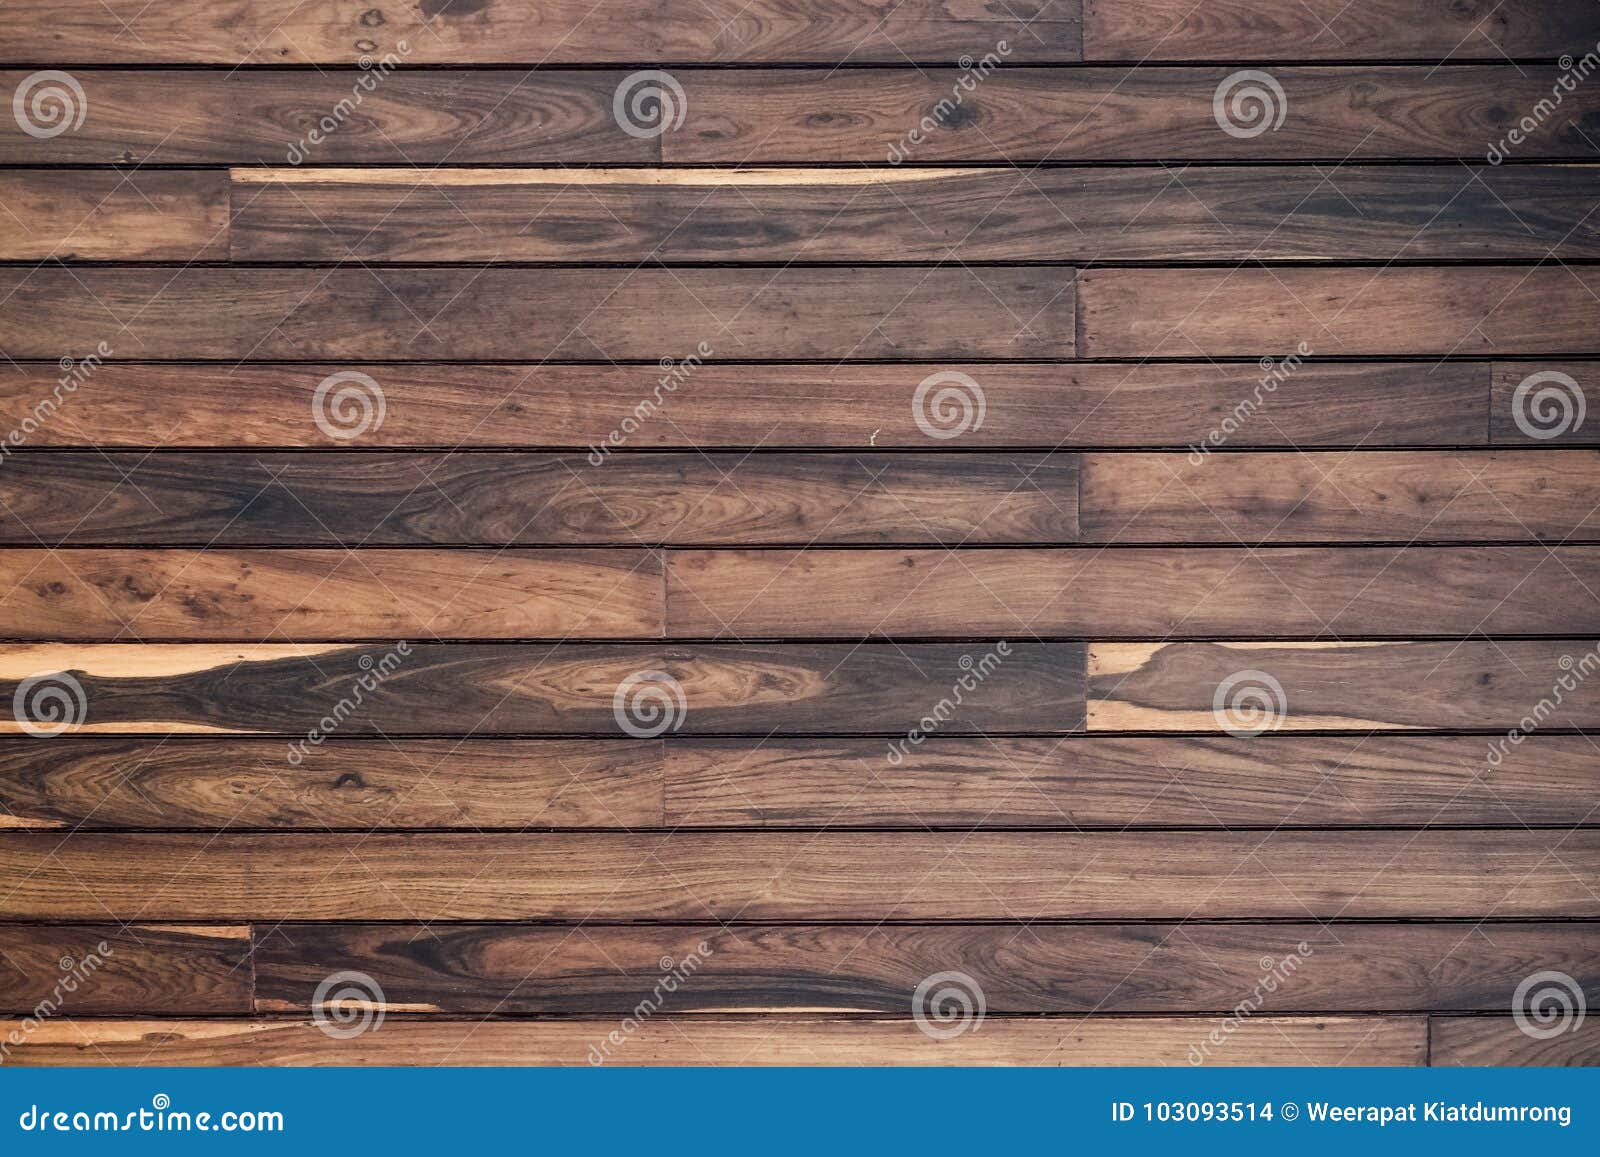 wood plank for 